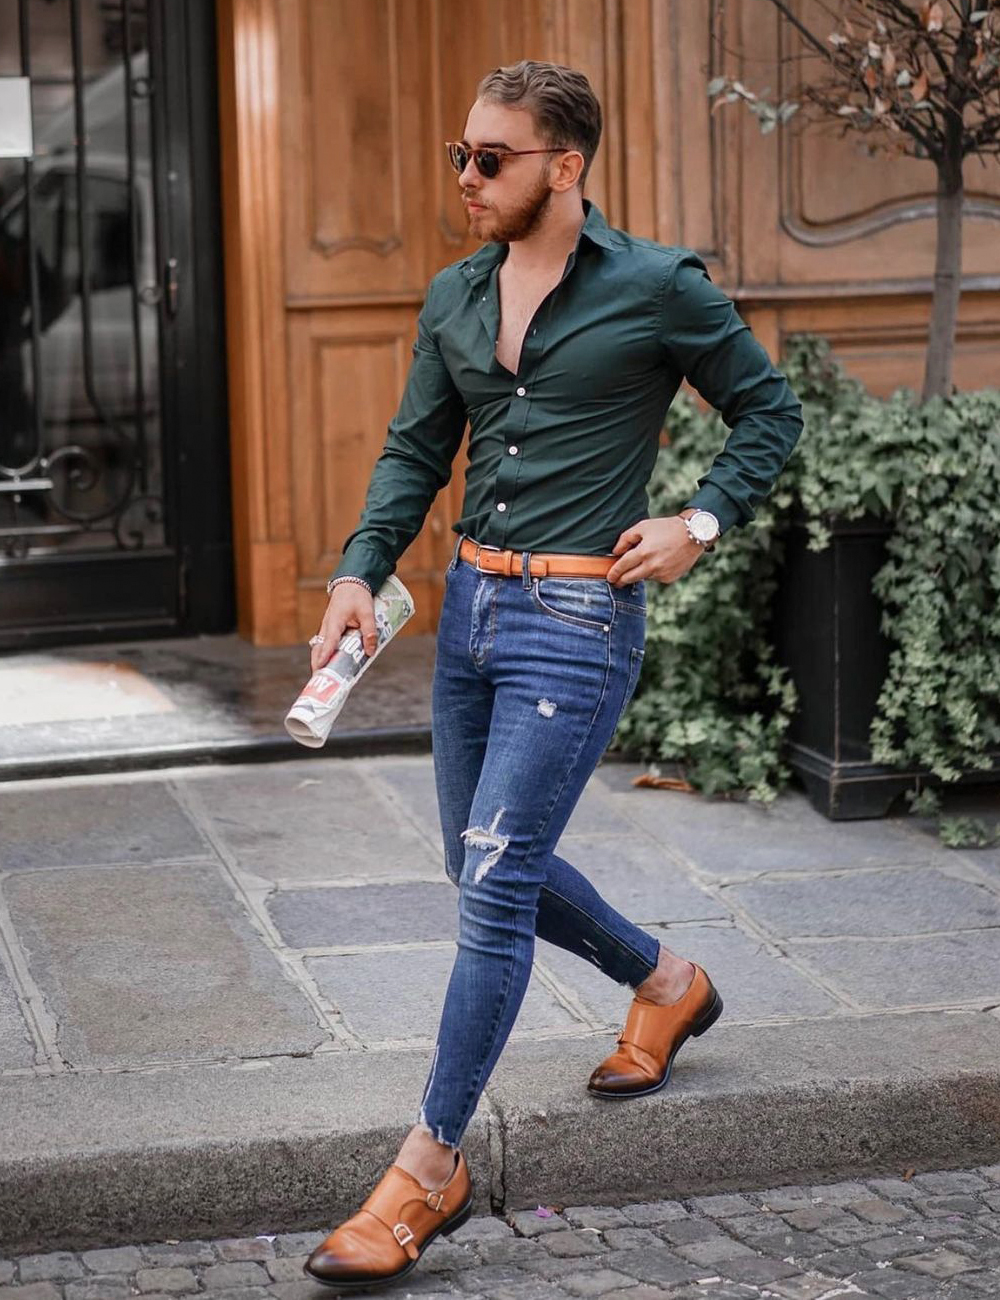 green shirt, blue jeans, and brown monk strap shoes